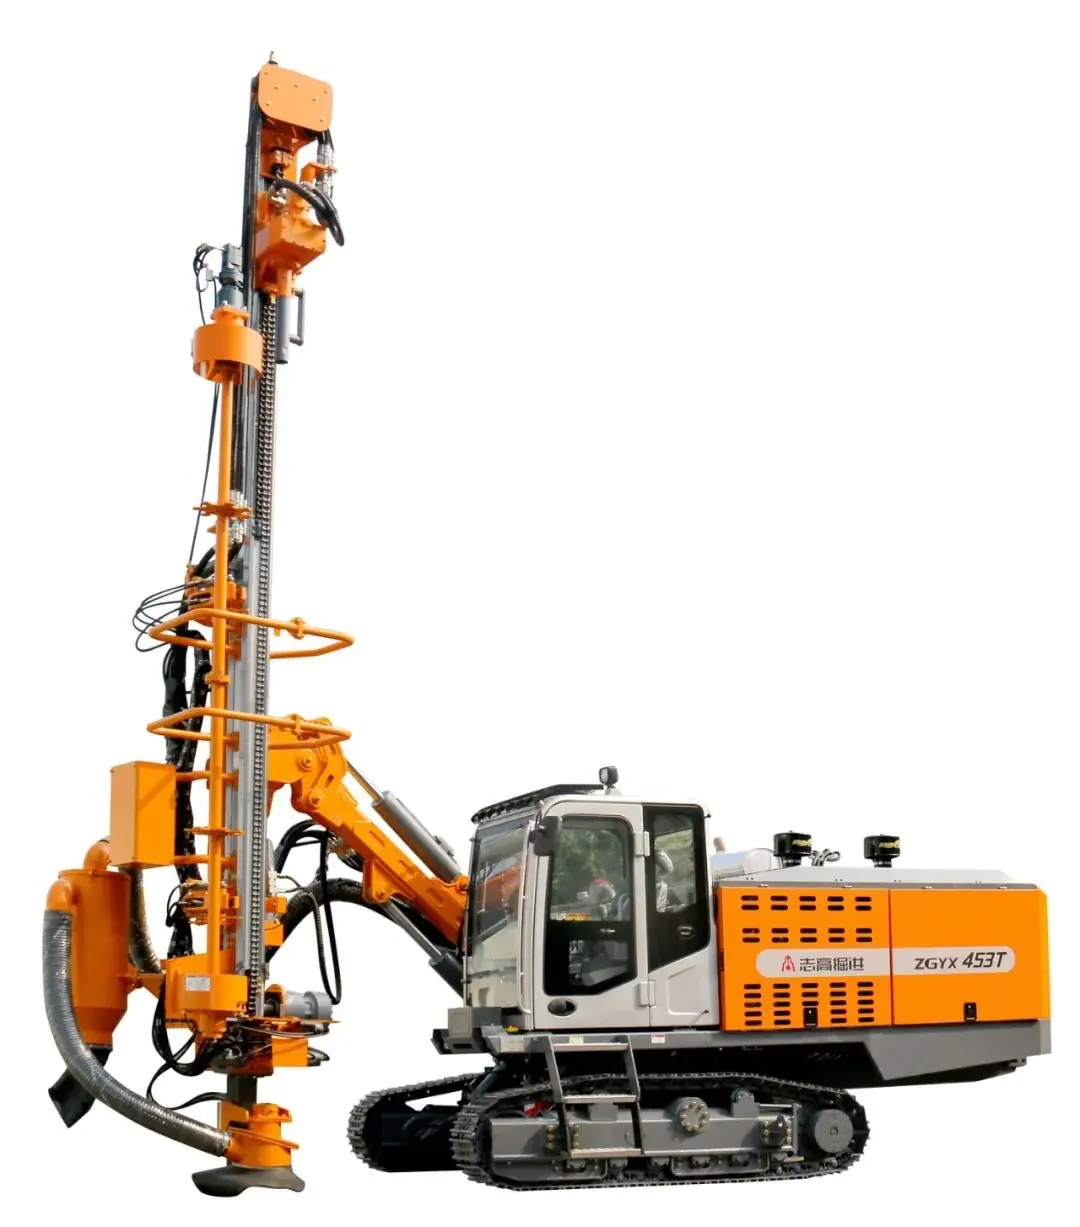 Blasting Drilling Rig ZGYX 453T Used in Quarry Extraction Quarry Mining Drilling Machine